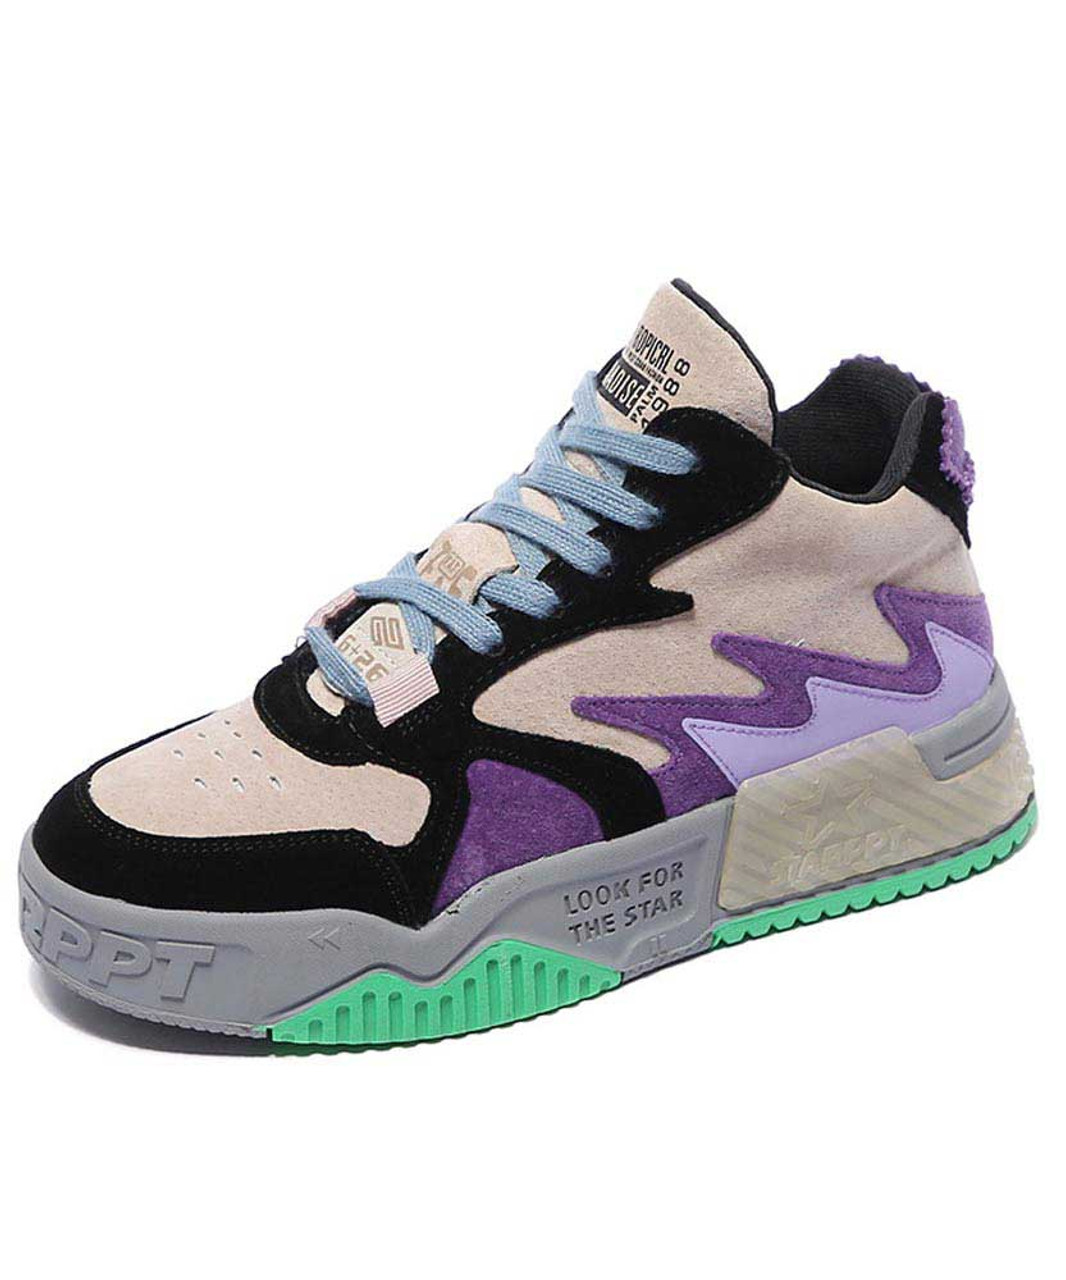 adidas Zx 420 Multi Colored Sneakers | Lyst